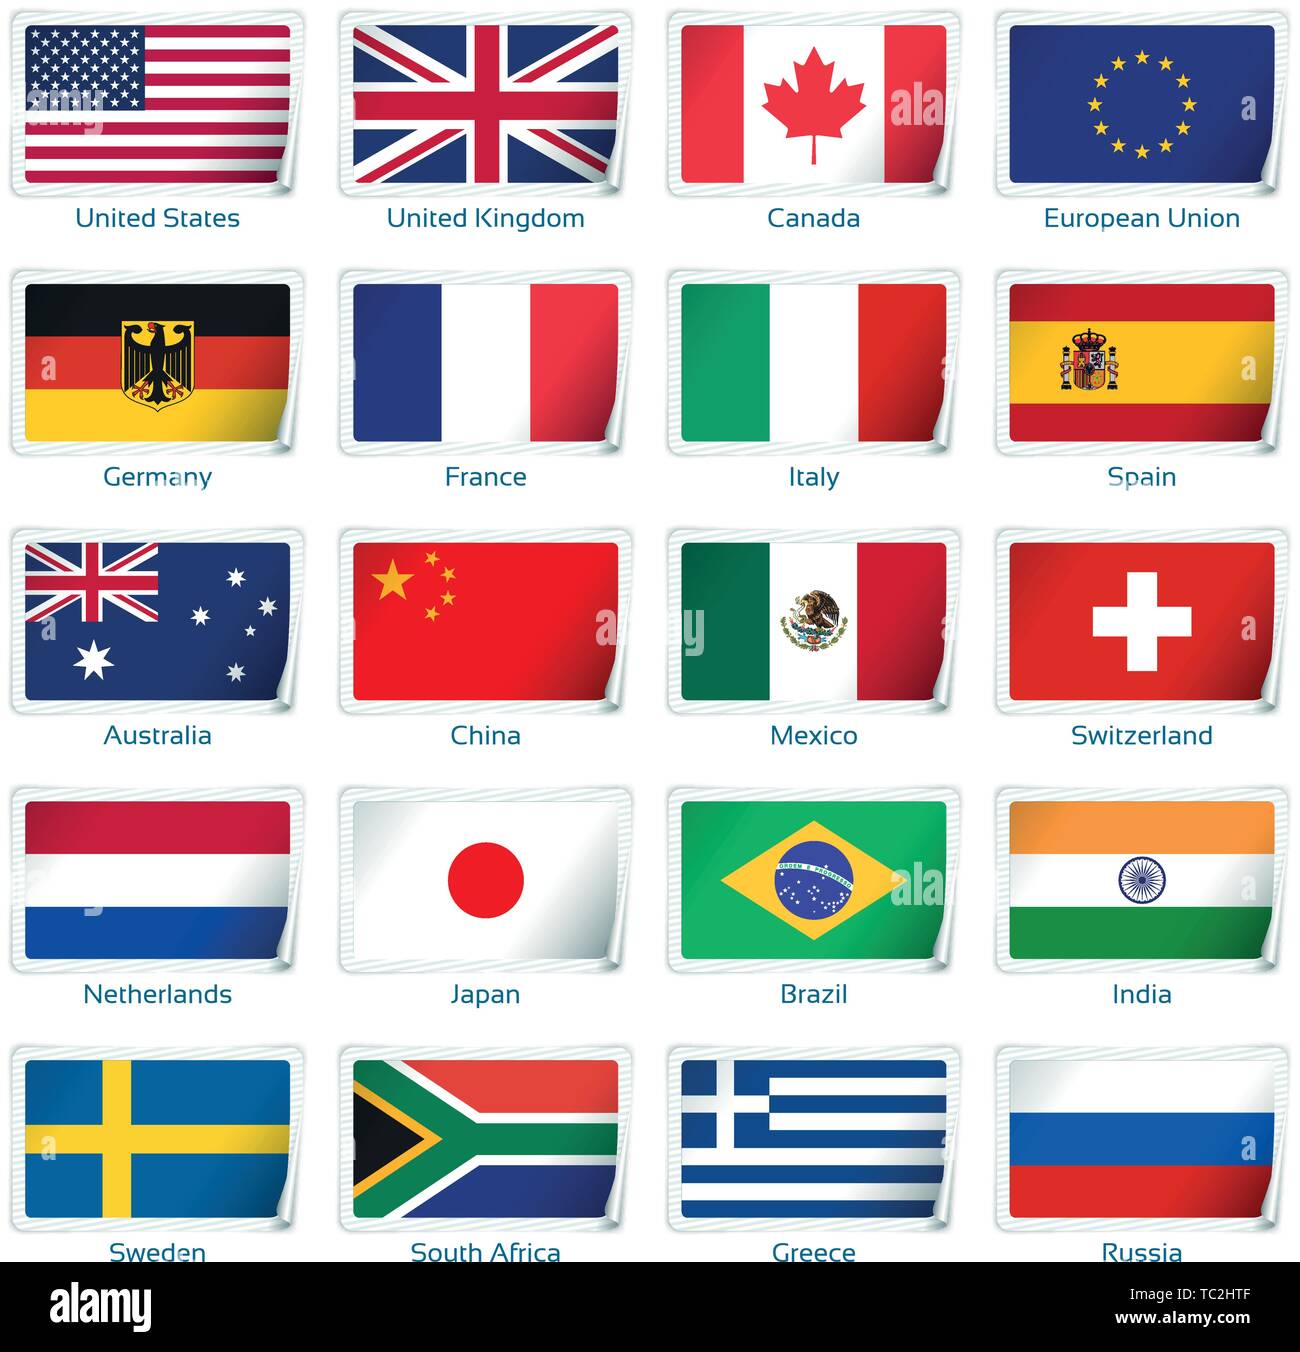 Sticker flags popular. Vector illustration. 3 layers. Shadows, flat flag you can use it separately, sticker. Collection of 220 world flags. Accurate colors. Easy changes. Stock Vector